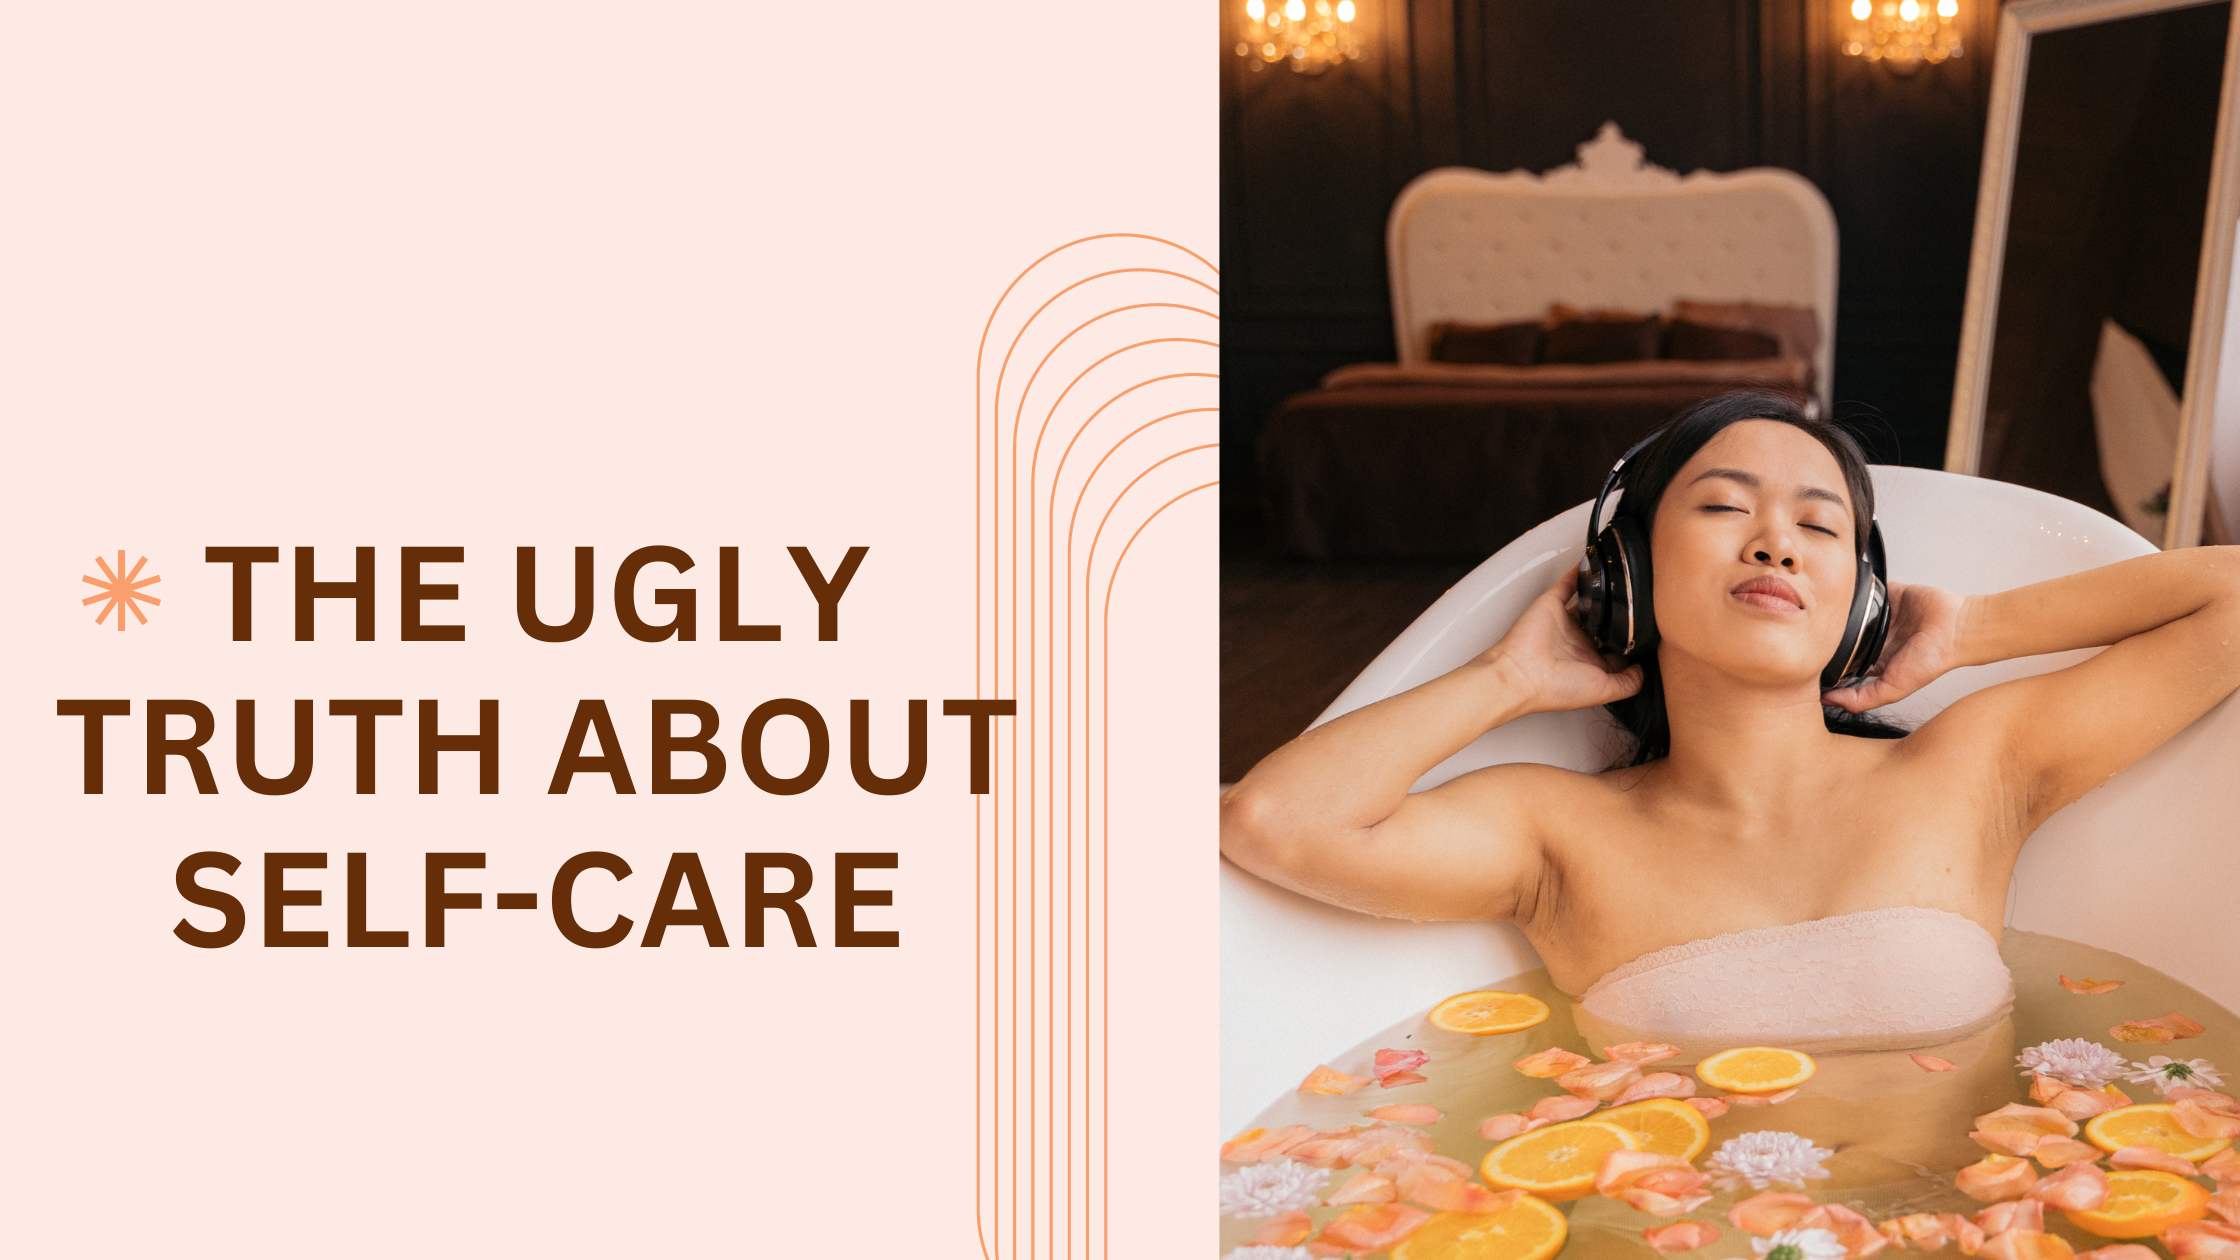 The Ugly Truth About Self-care